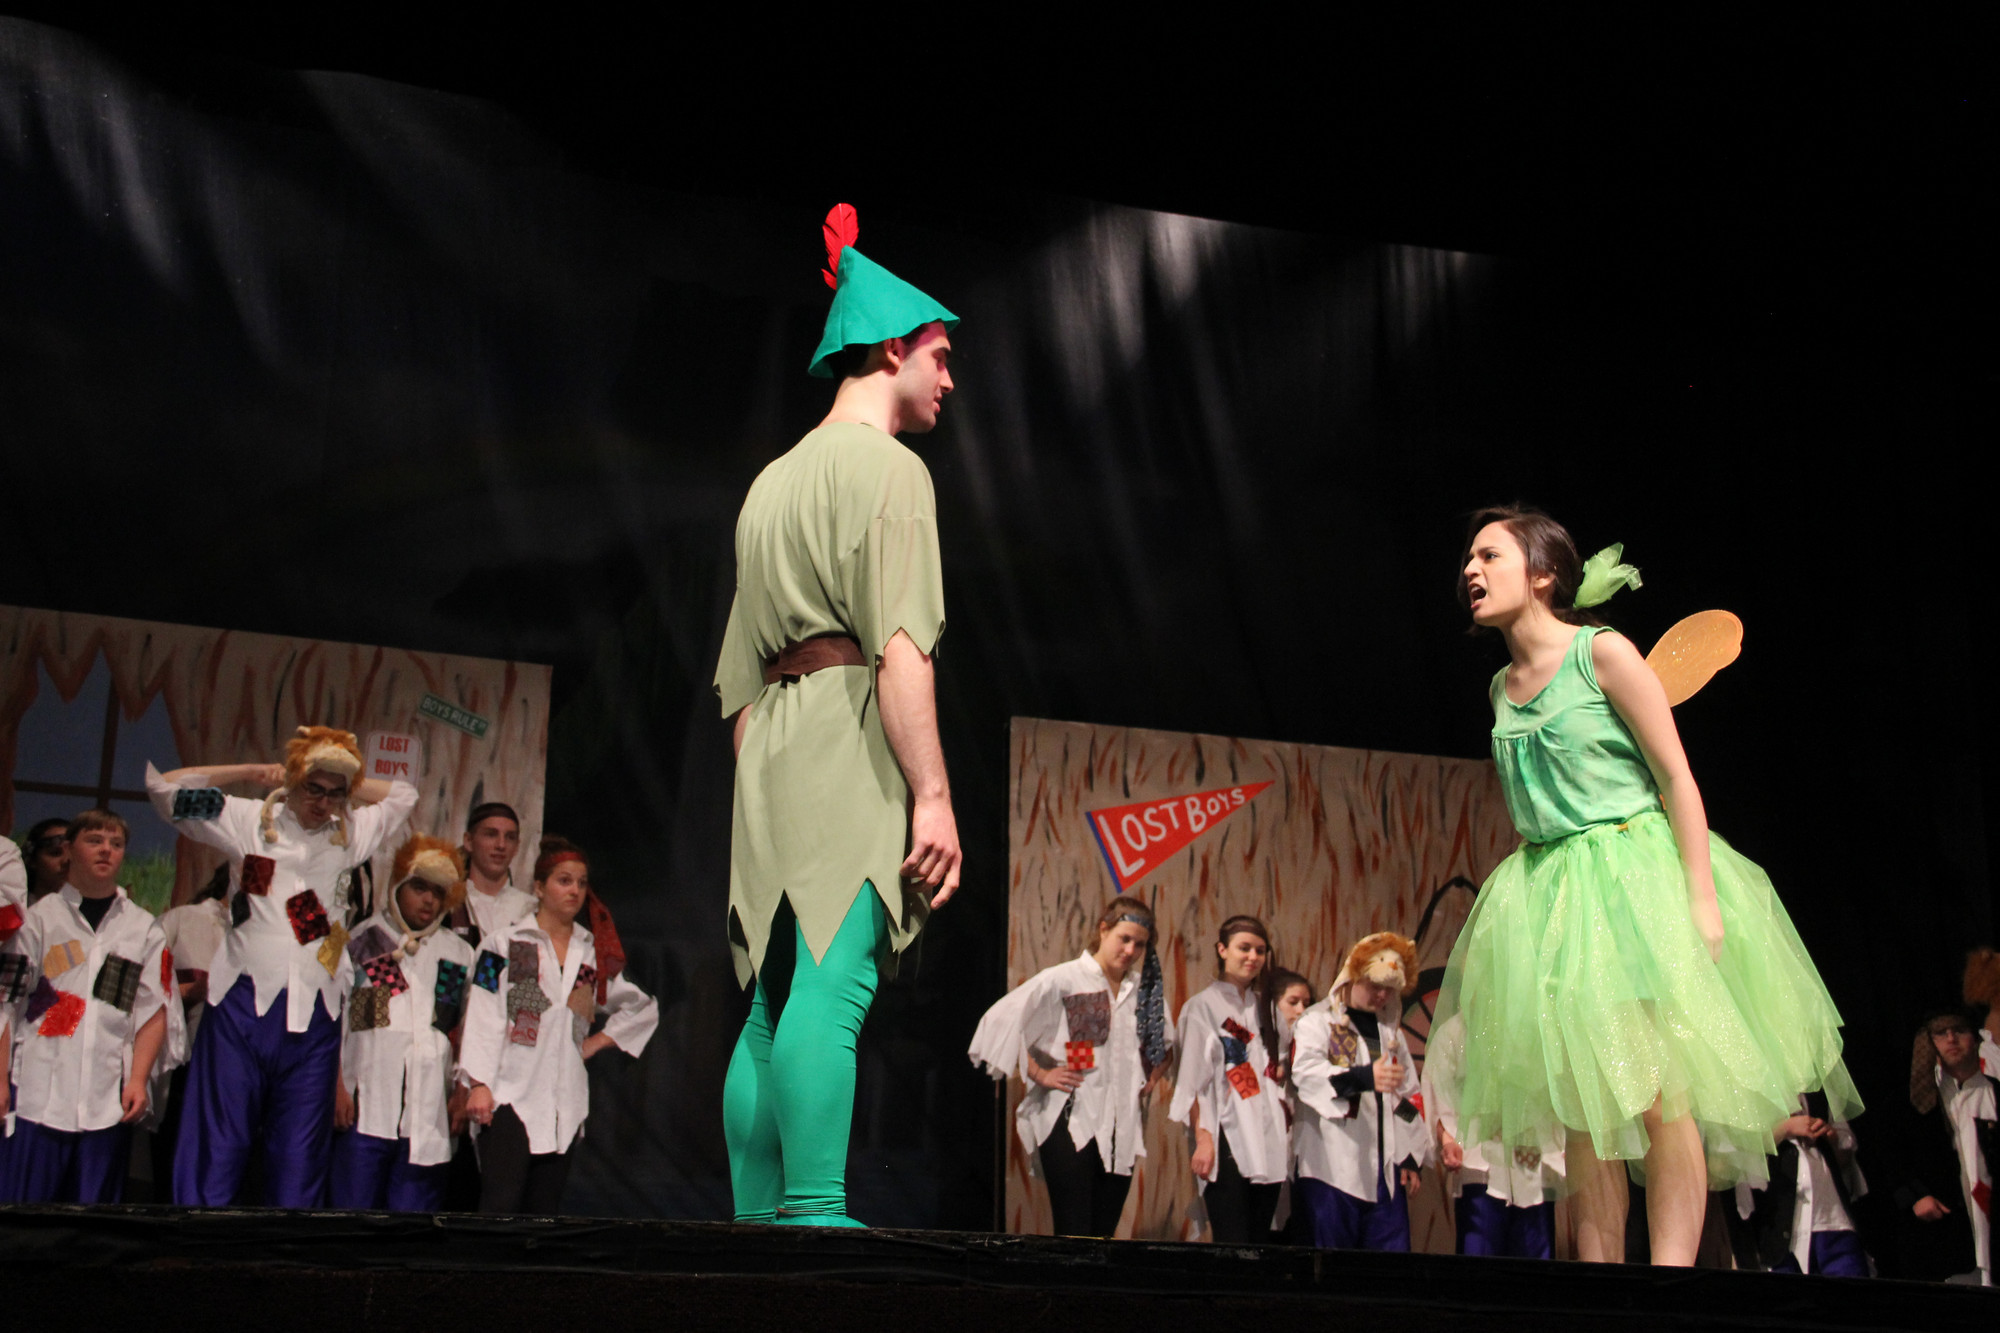 Tink, played by Jackie Cano, yells at Peter Pan, John Manna, right before she sings a solo of “We are Never Ever Getting Back Together” Pictured in the background are the Lost Boys